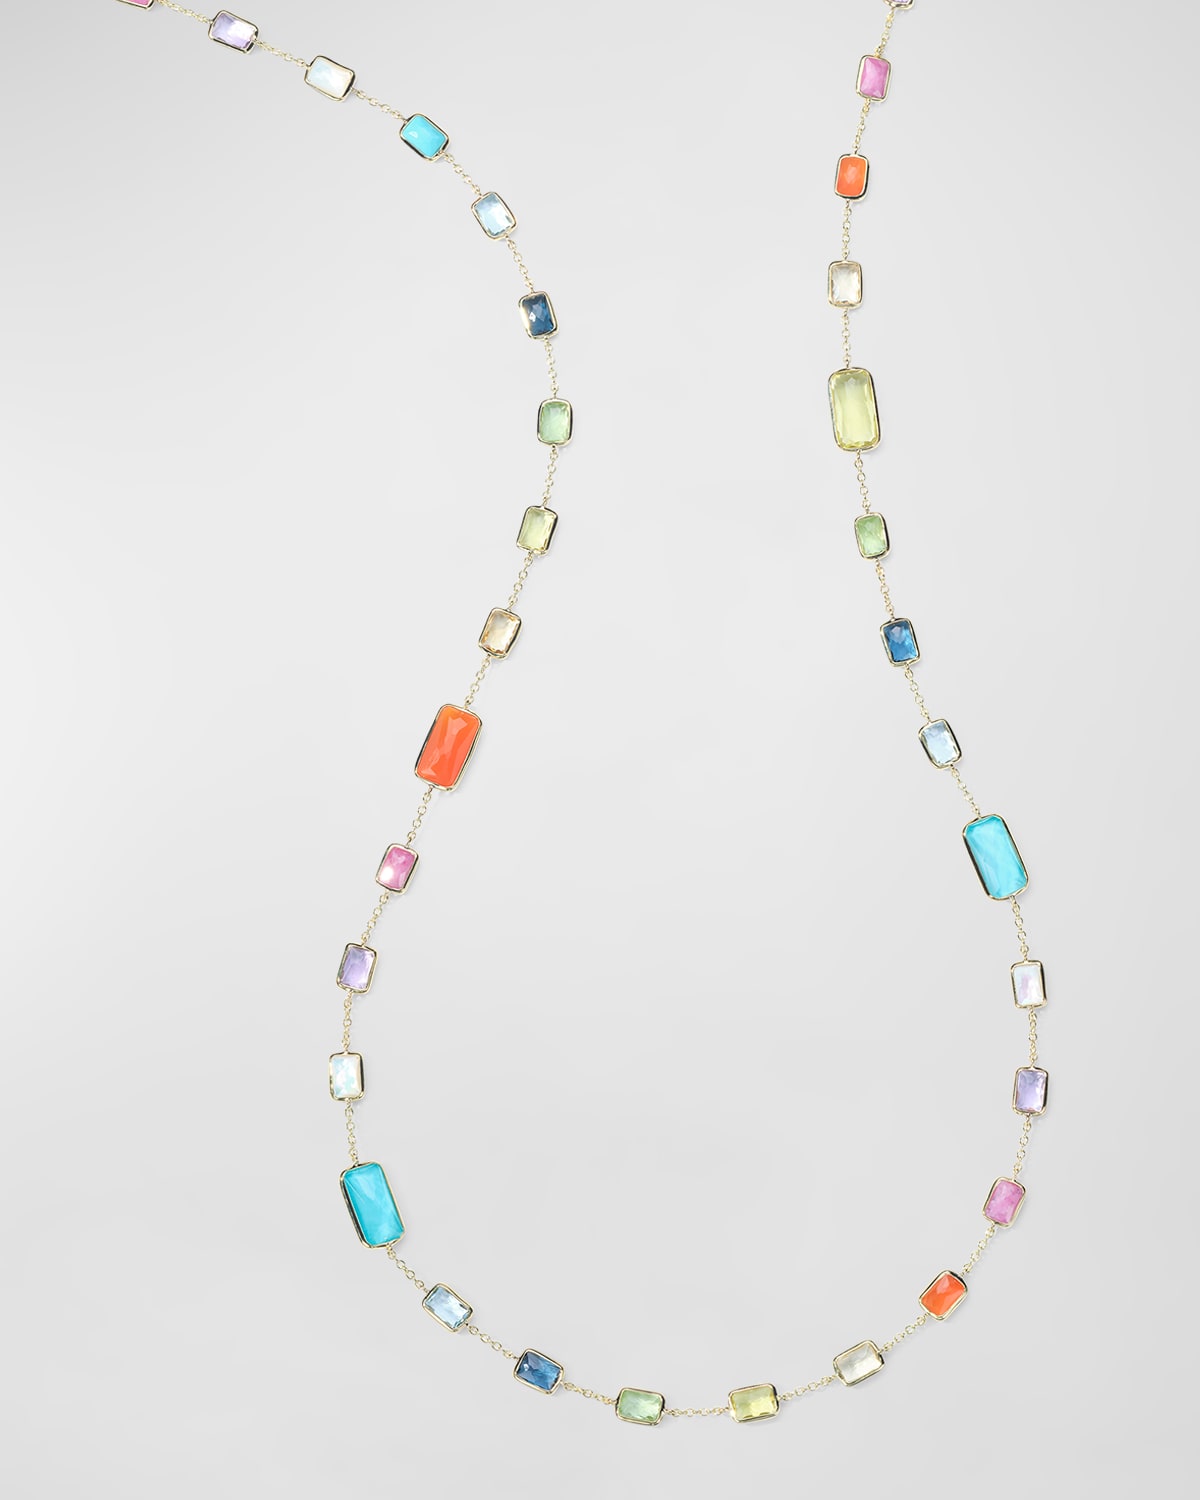 18K Rock Candy Stone Chain Necklace in Summer Rainbow 2, 34.5"L